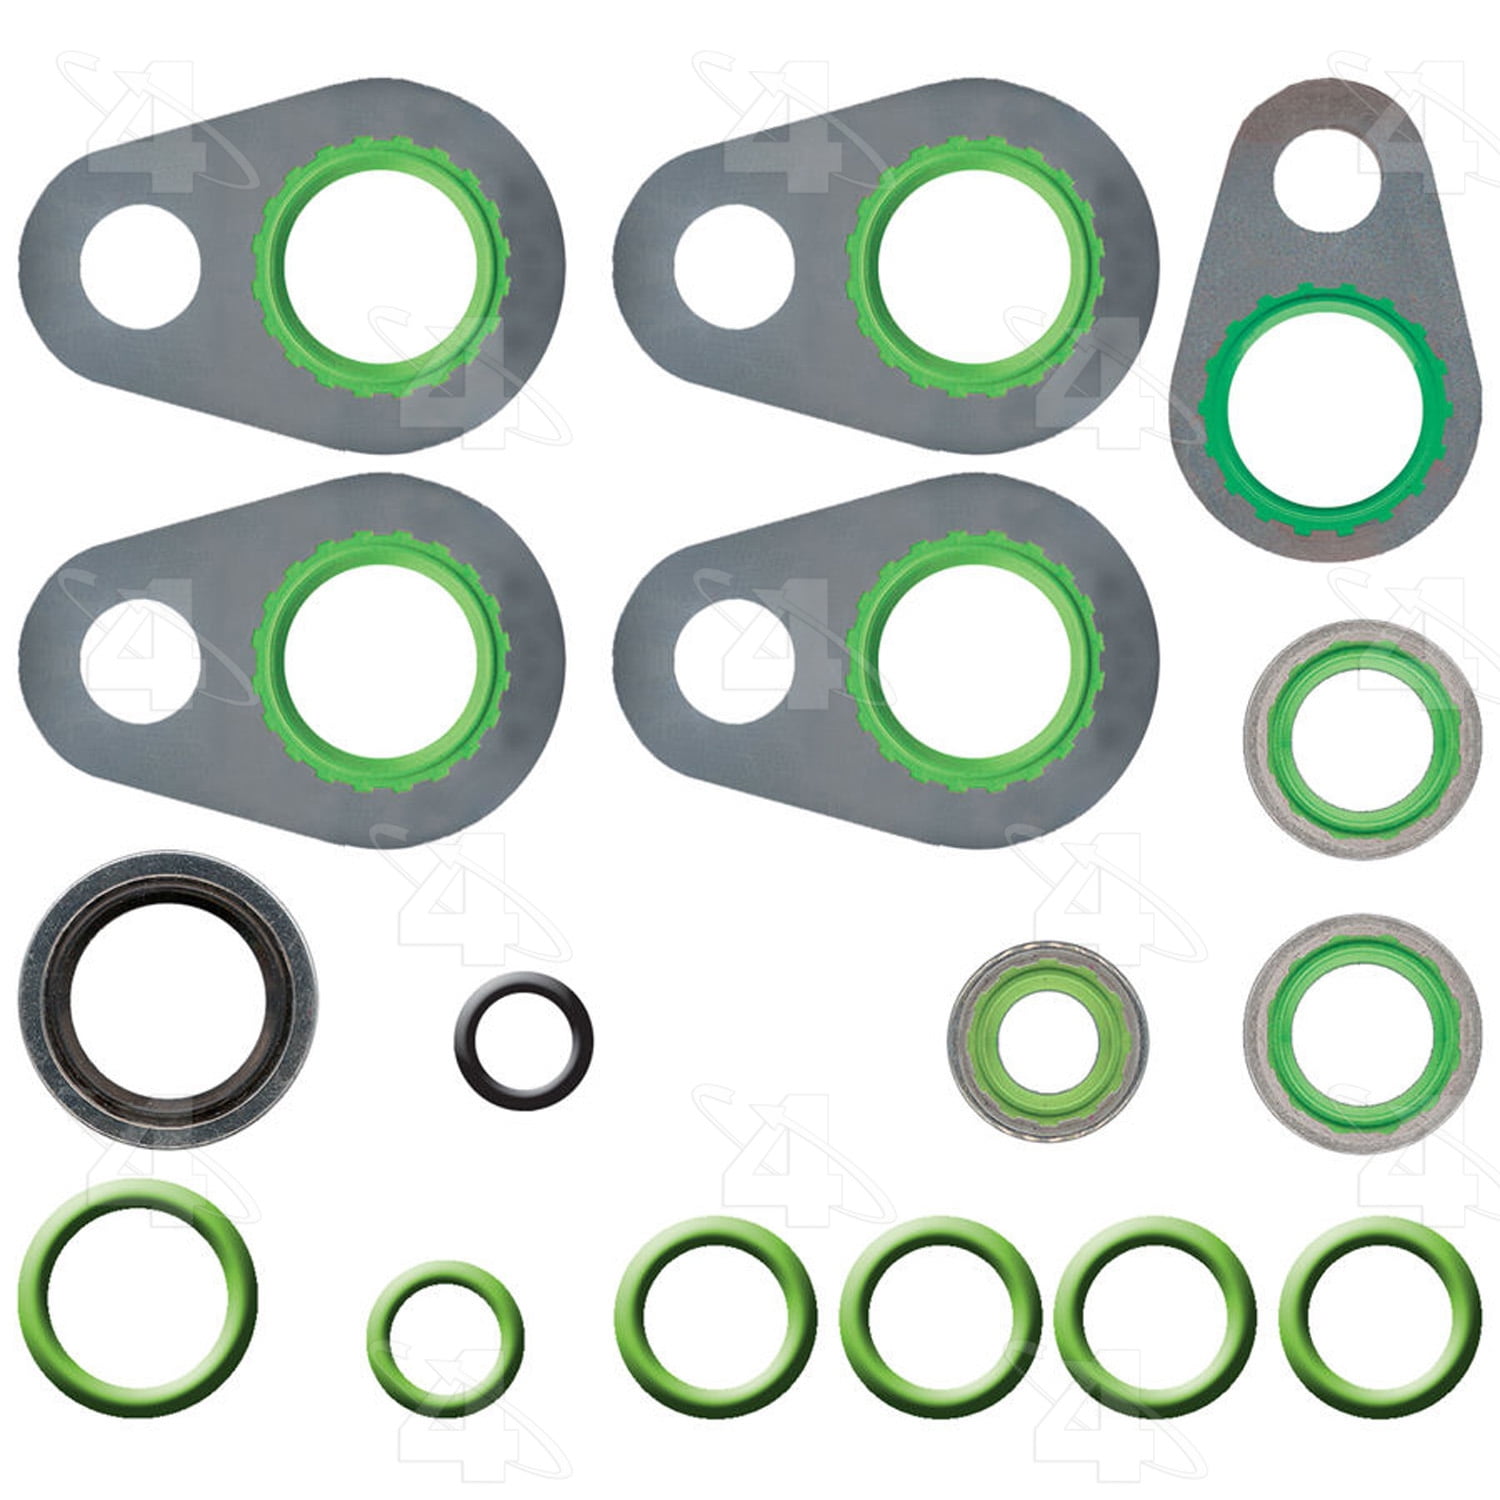 Four Seasons 26772 O-Ring & Gasket Air Conditioning System Seal Kit 